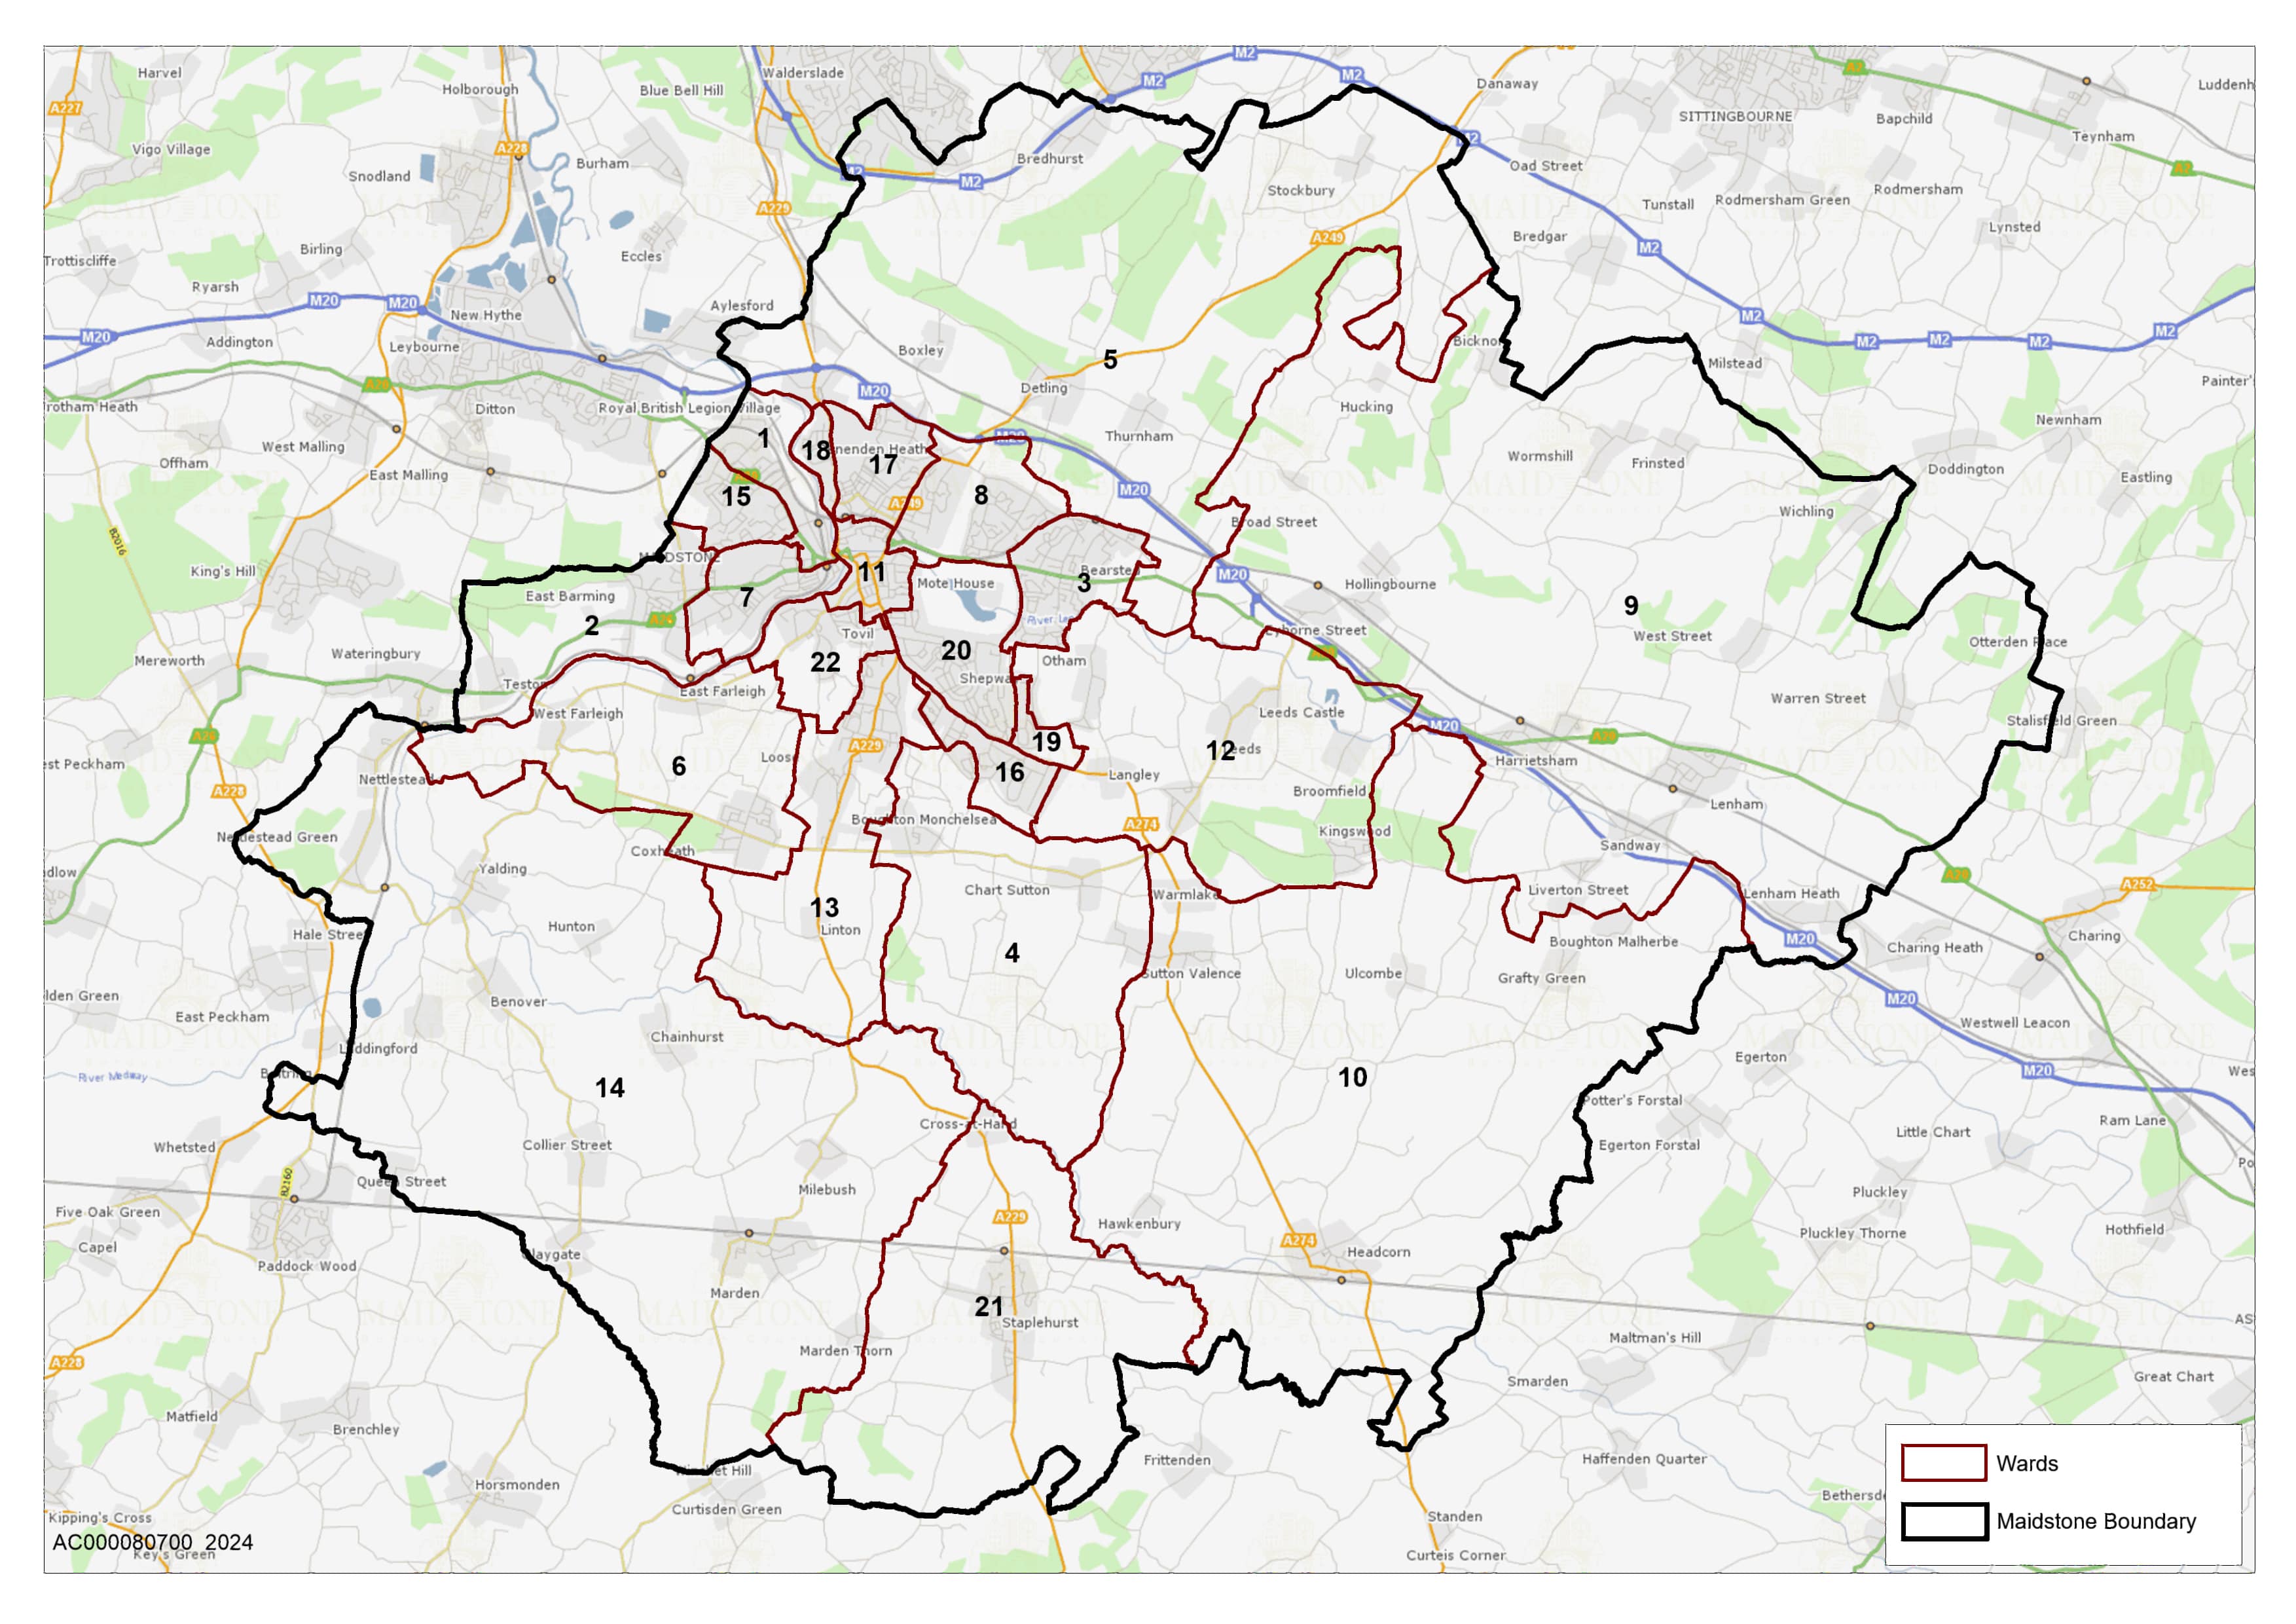 Map outlining the Maidstone Borough Council electoral wards within the Maidstone boundary.